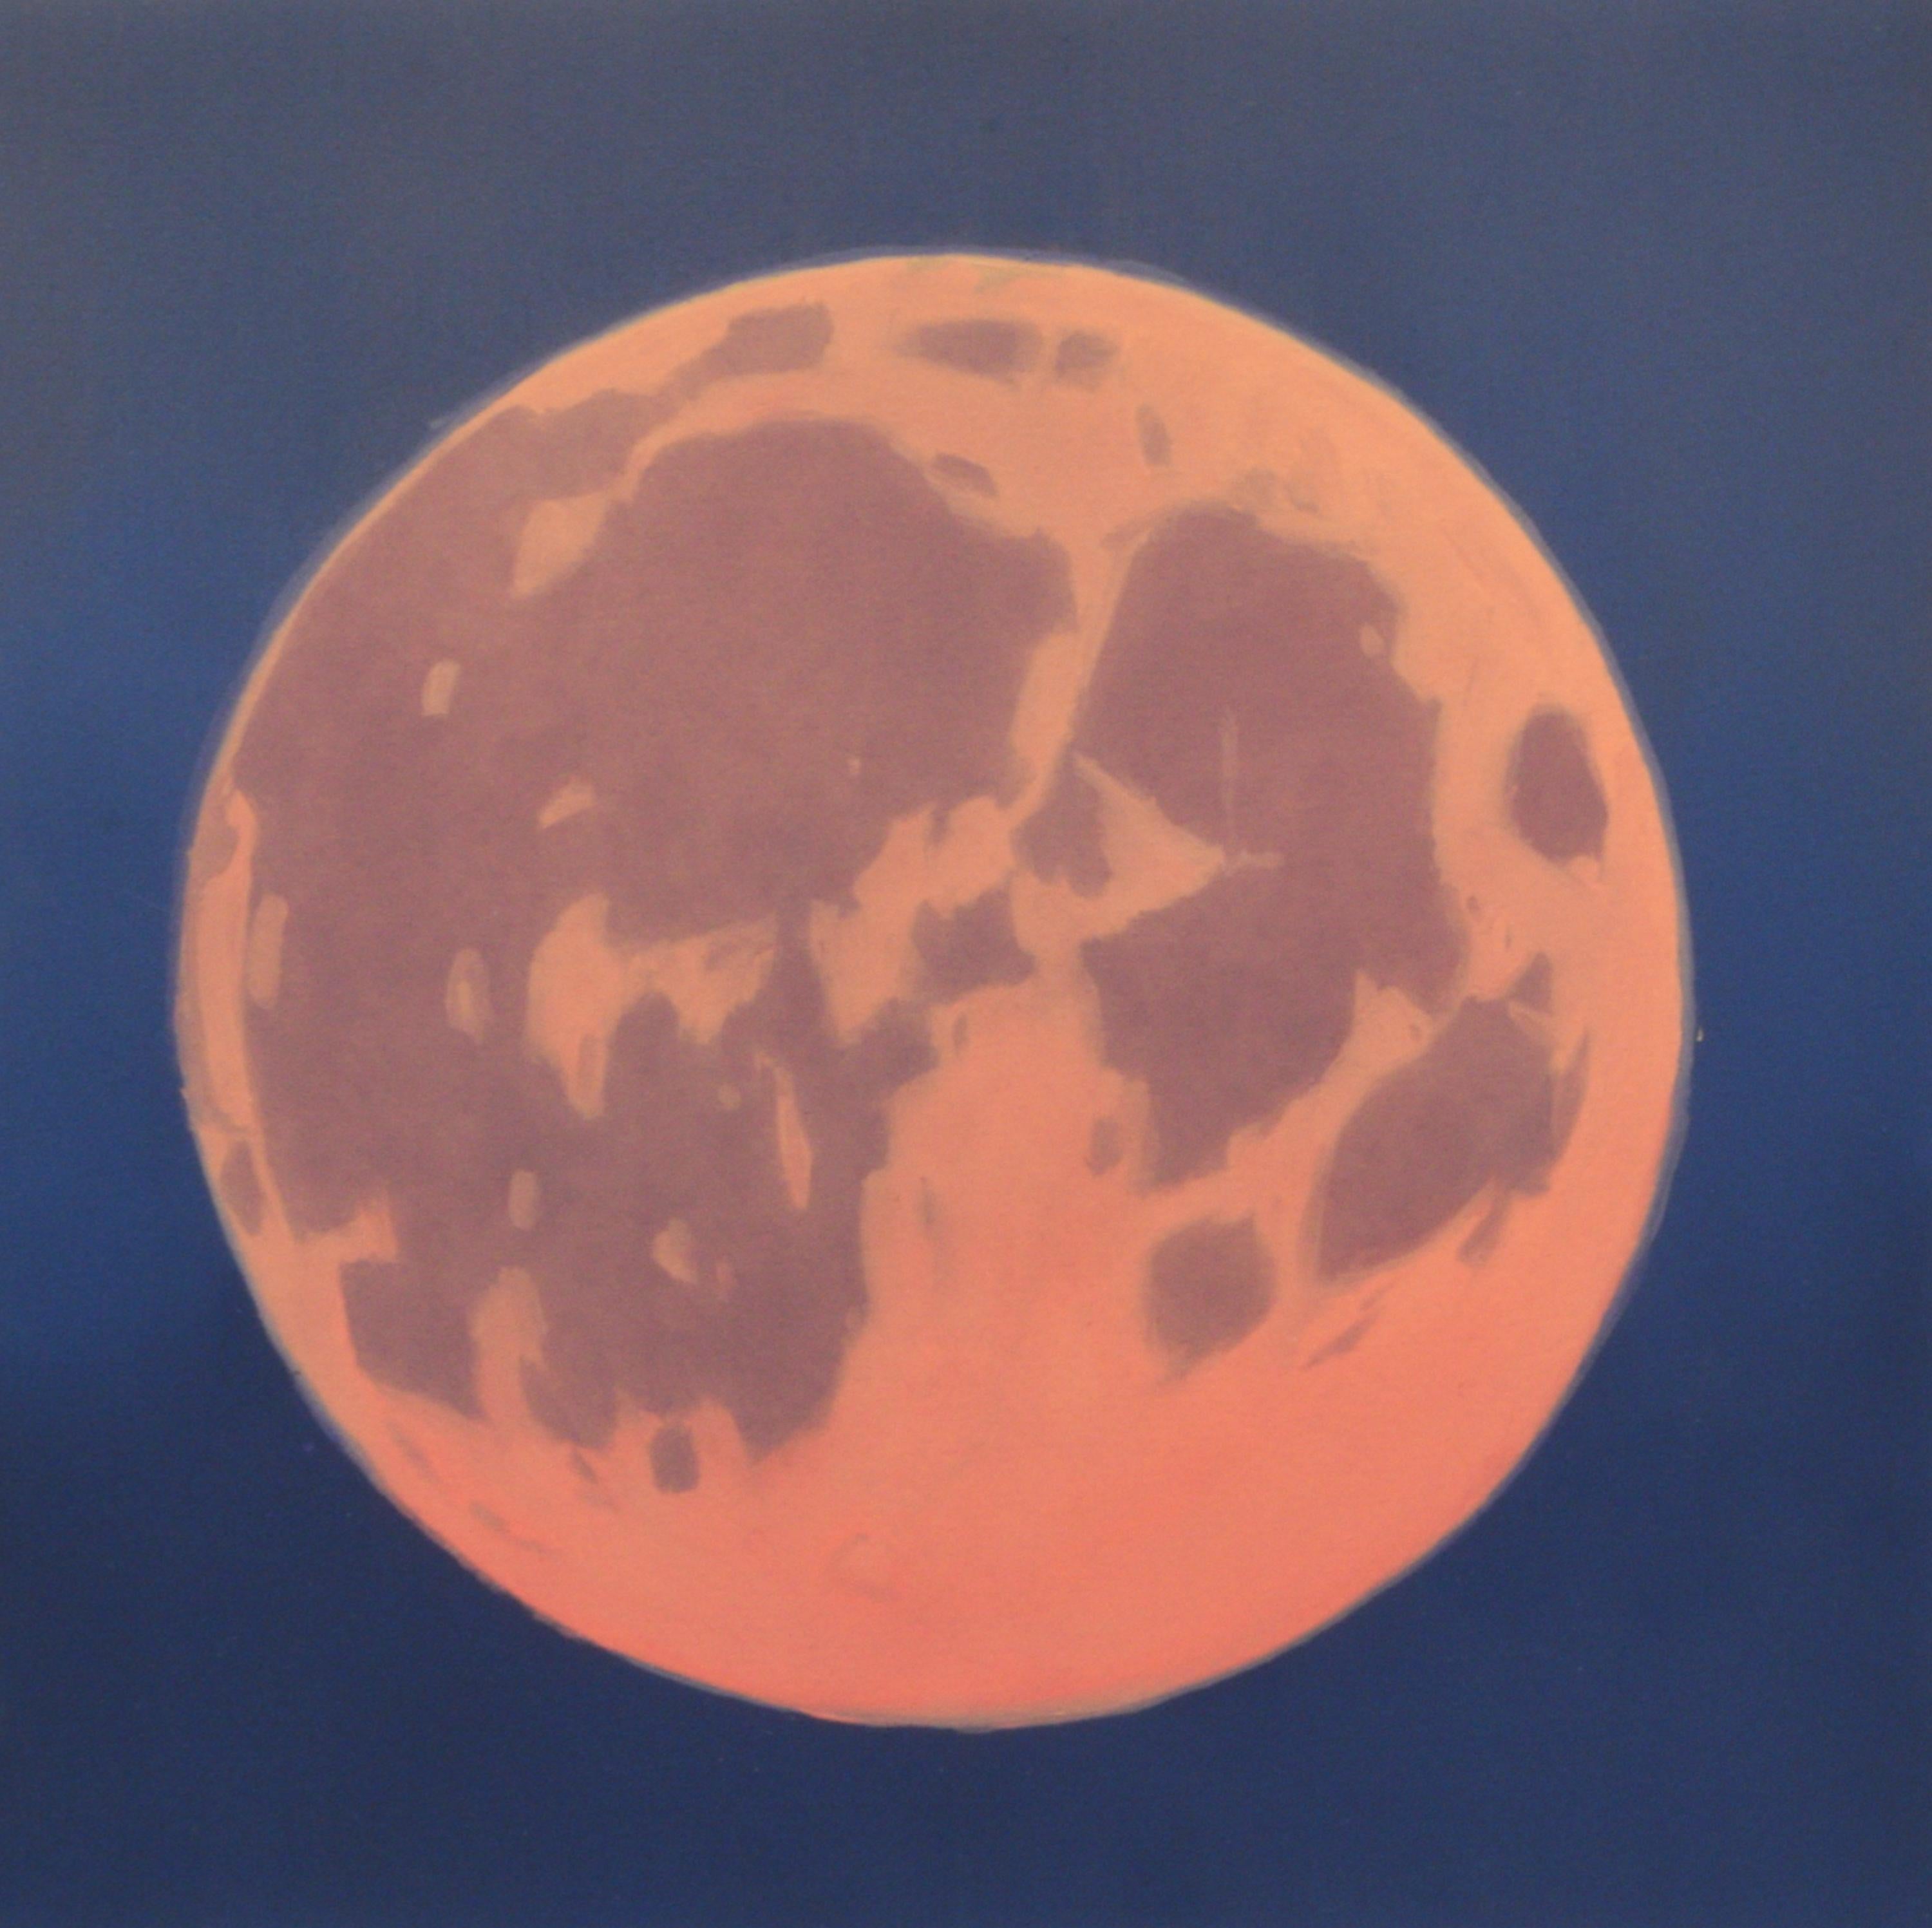 Paper Moon 5 - Painting by Beau Carey